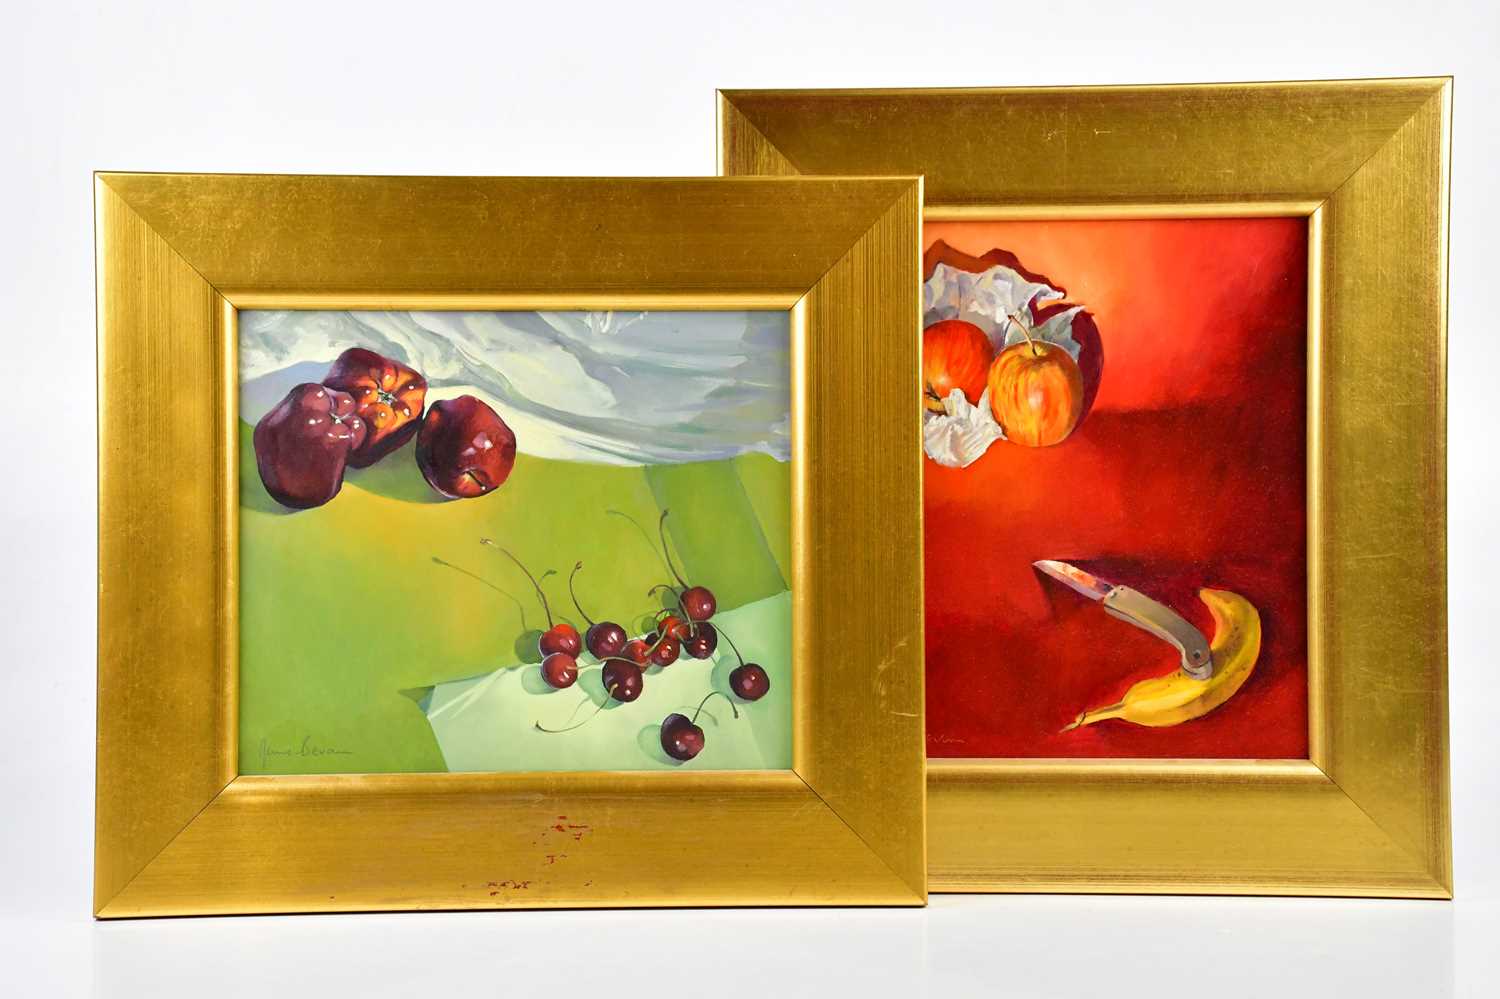 † JUNE BEVAN; two oils on board, 'Royal Gala on Red' and 'Washington Reds with Cherries', both